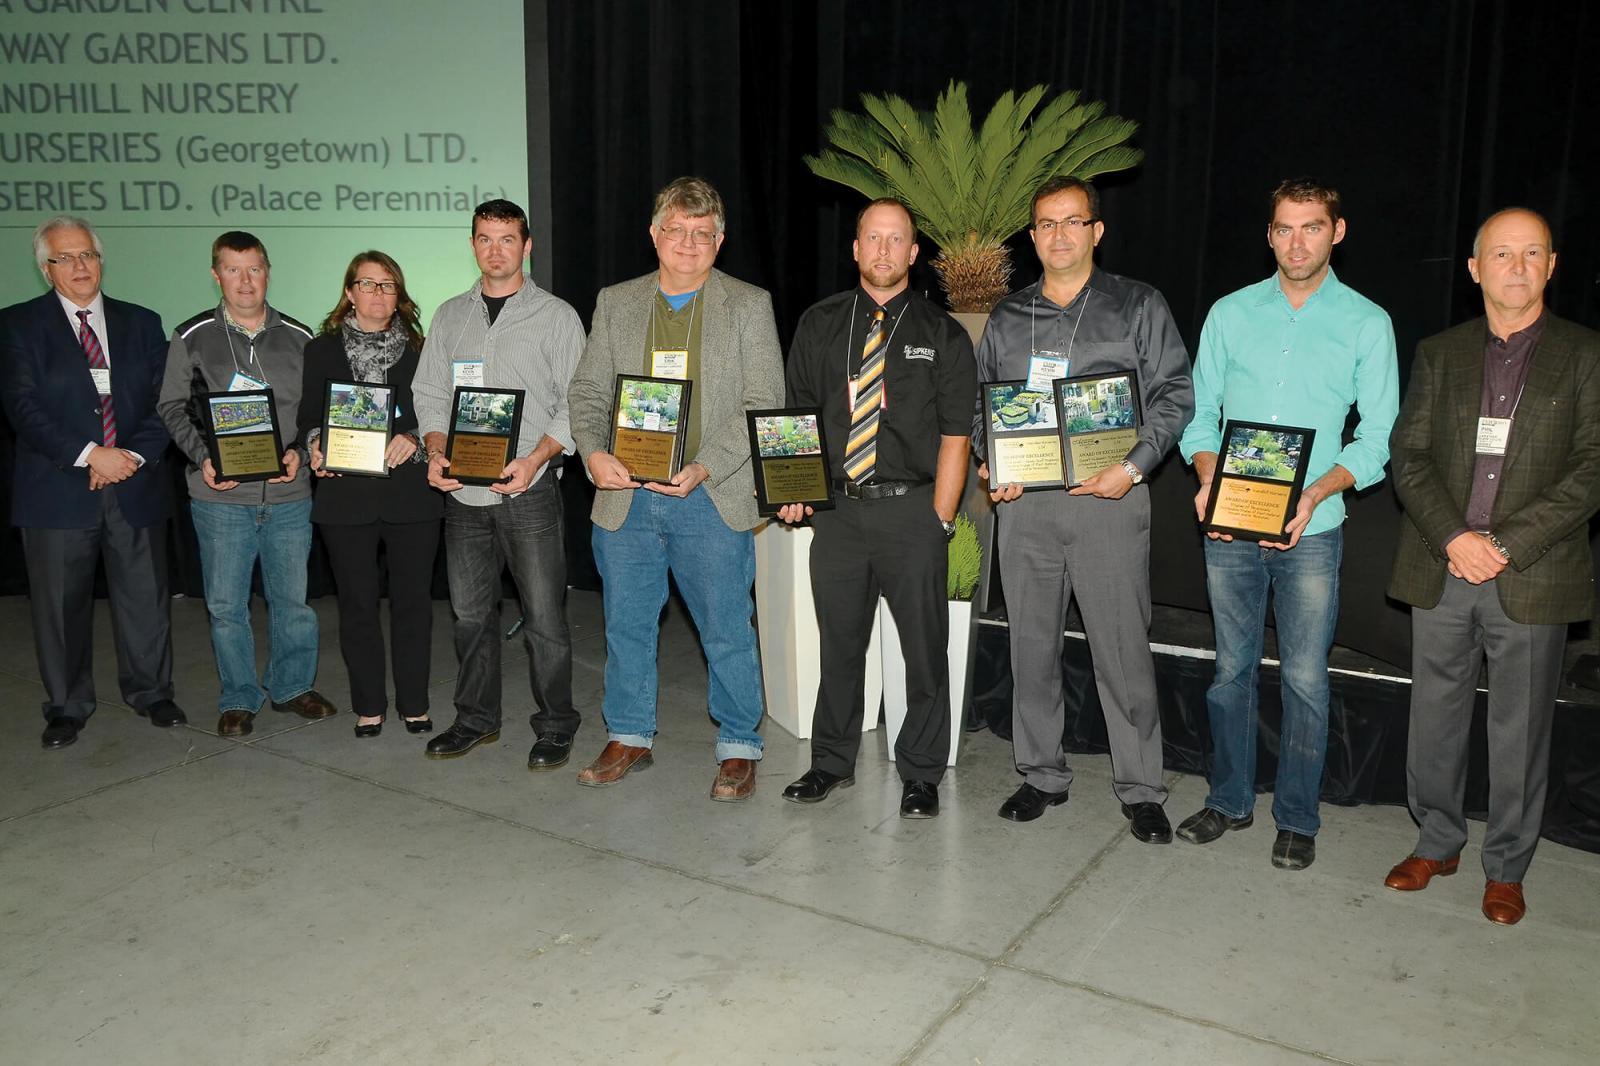 Top garden centres and growers honoured at Awards of Excellence